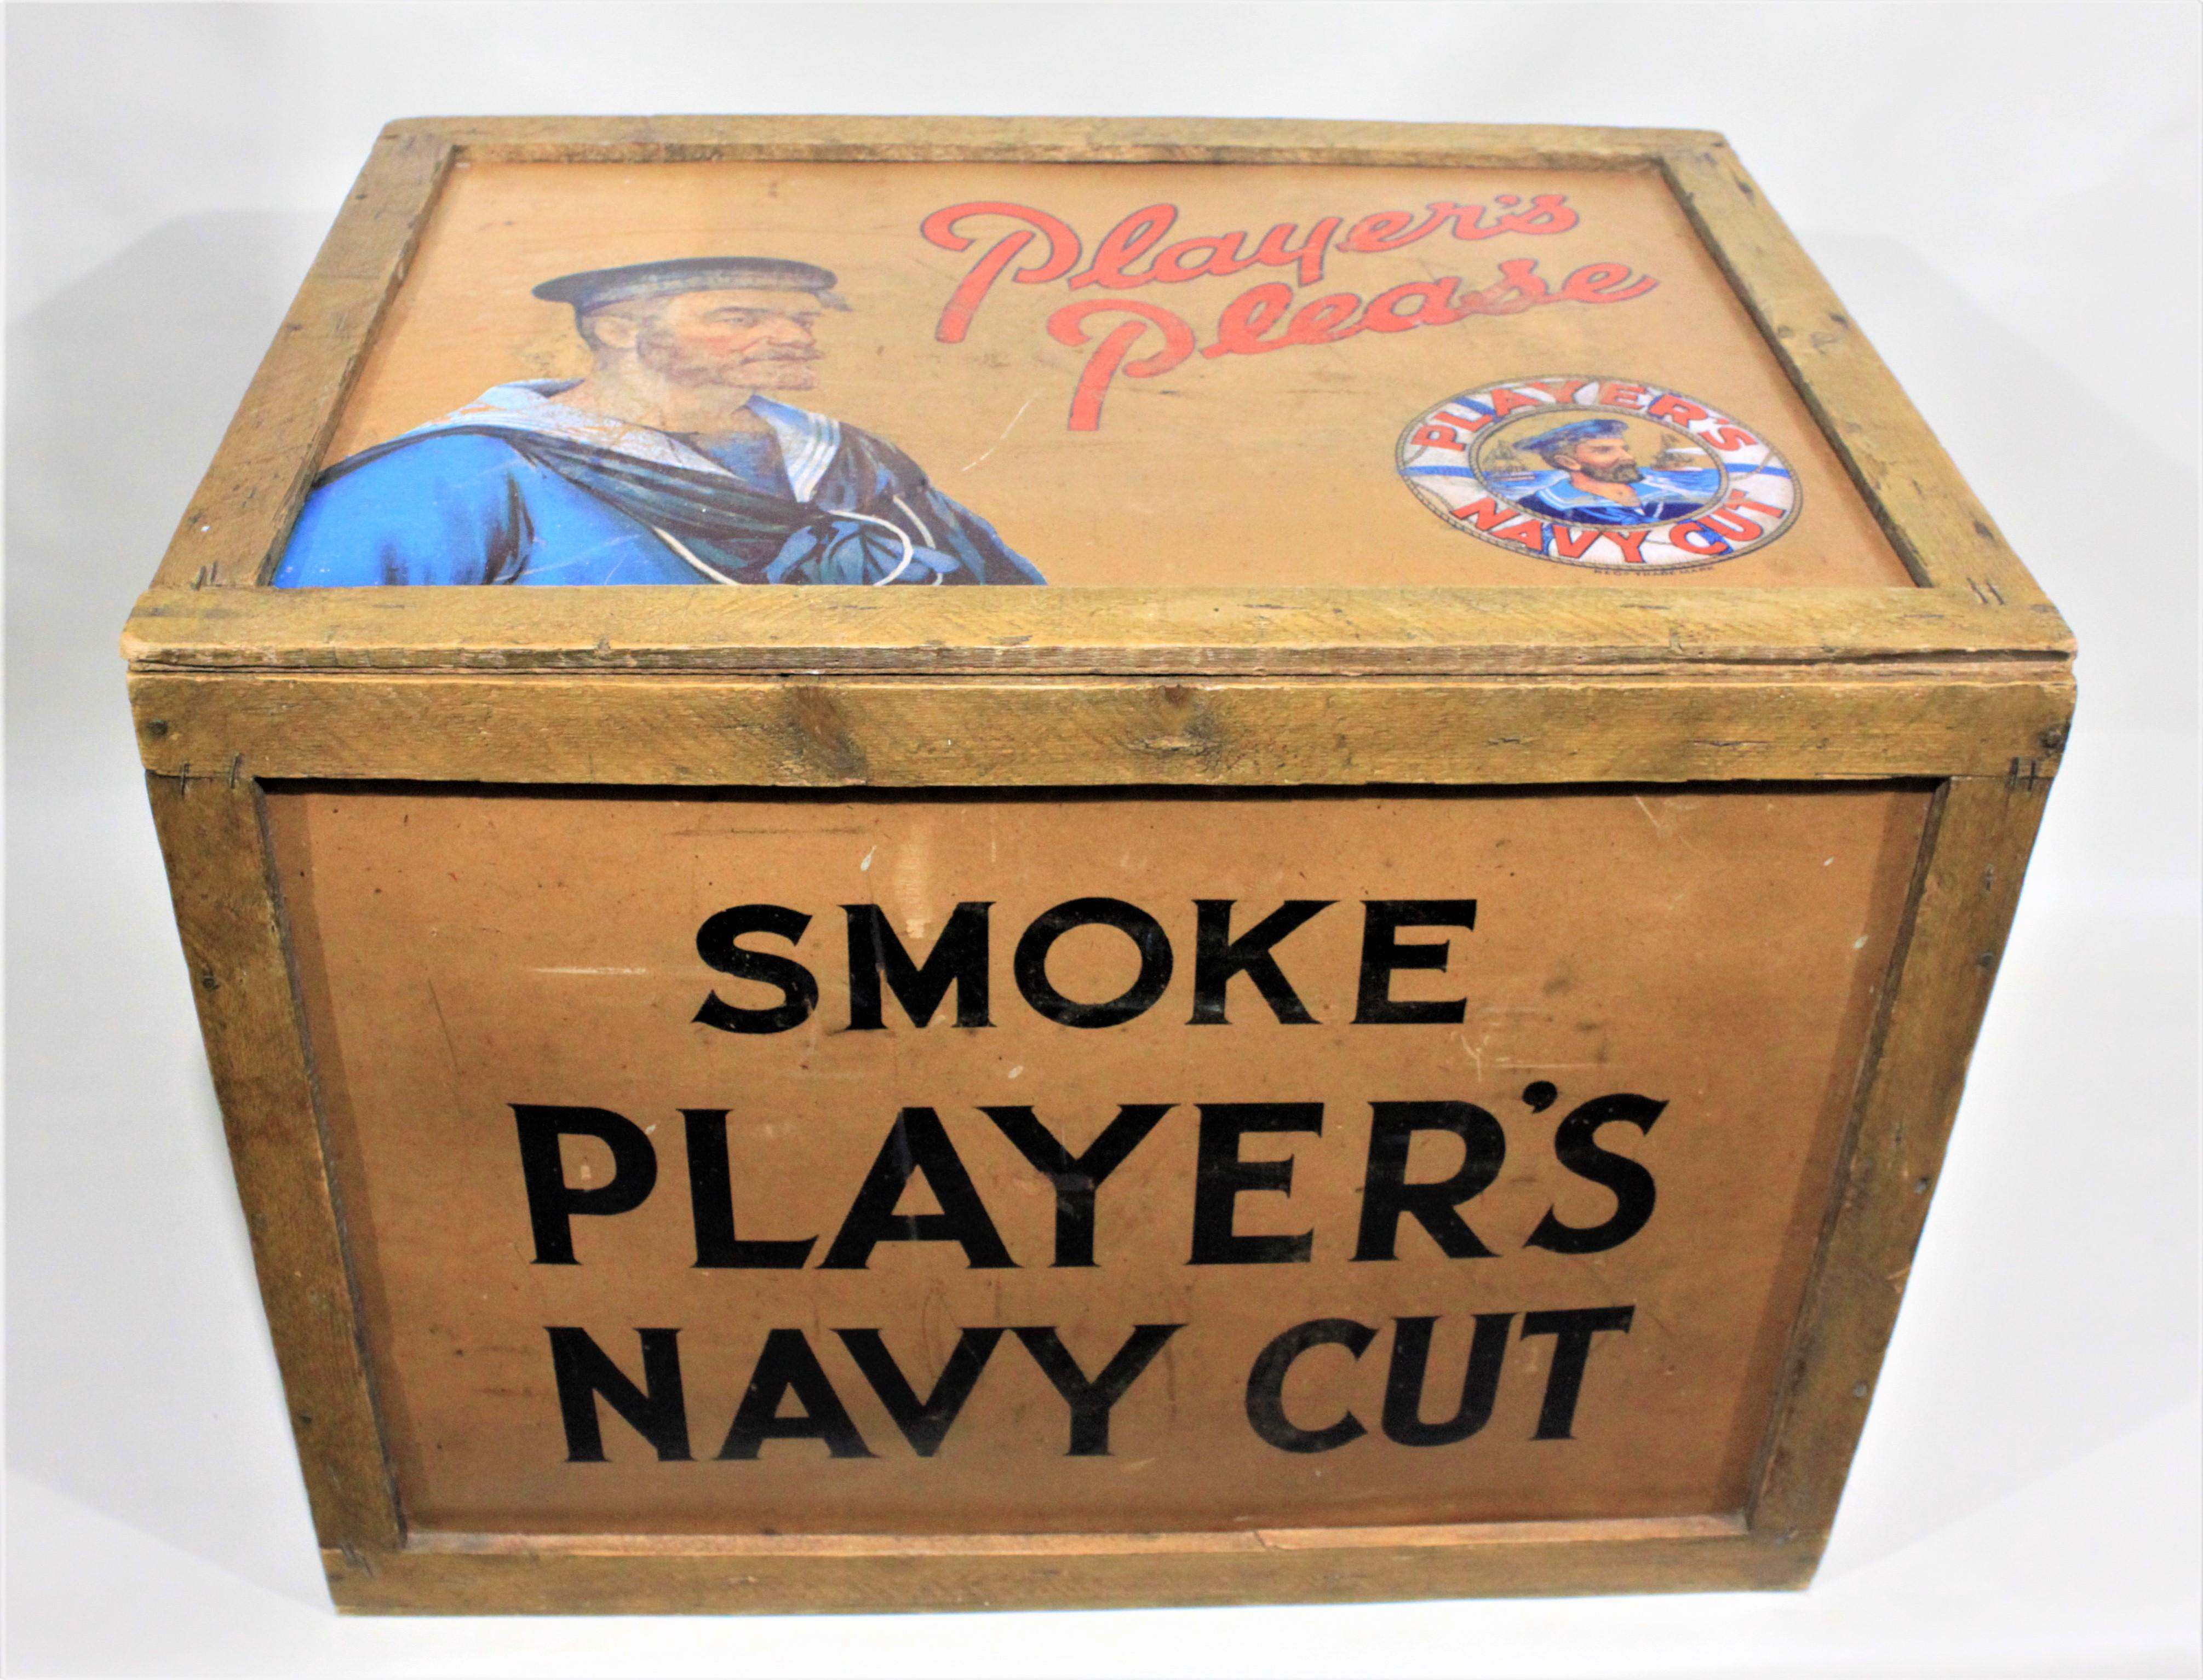 Made in the mid-1860s, this wooden and silk screened shipping crate was made for the iconic Player's Navy Cut cigarettes. The crate appears to have been shipped from England, and most likely from the original manufacturing establishment in